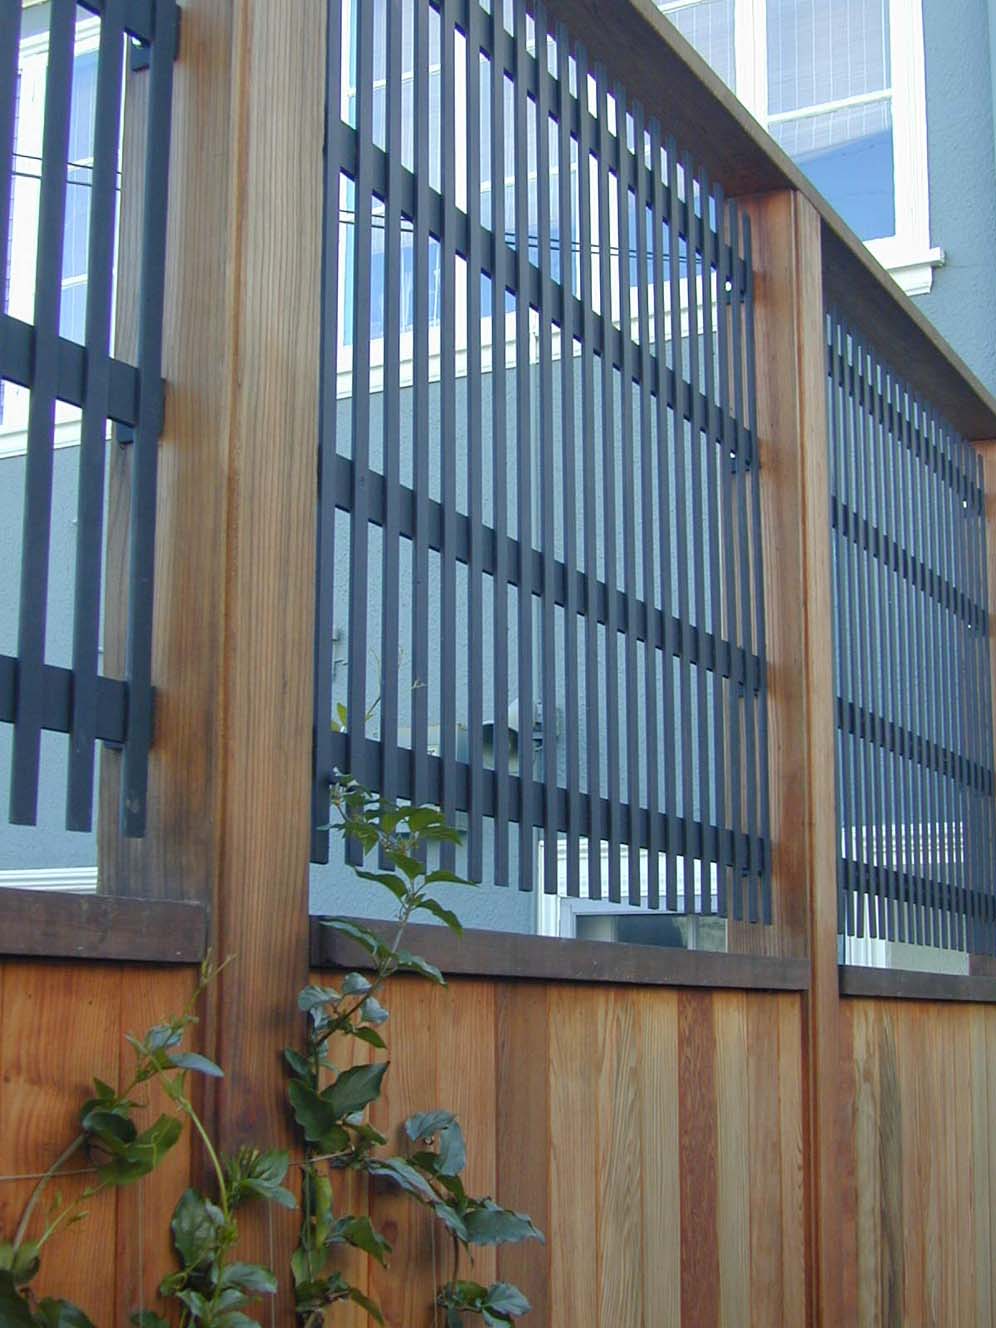 Fence with Upper Area Viewing Detail